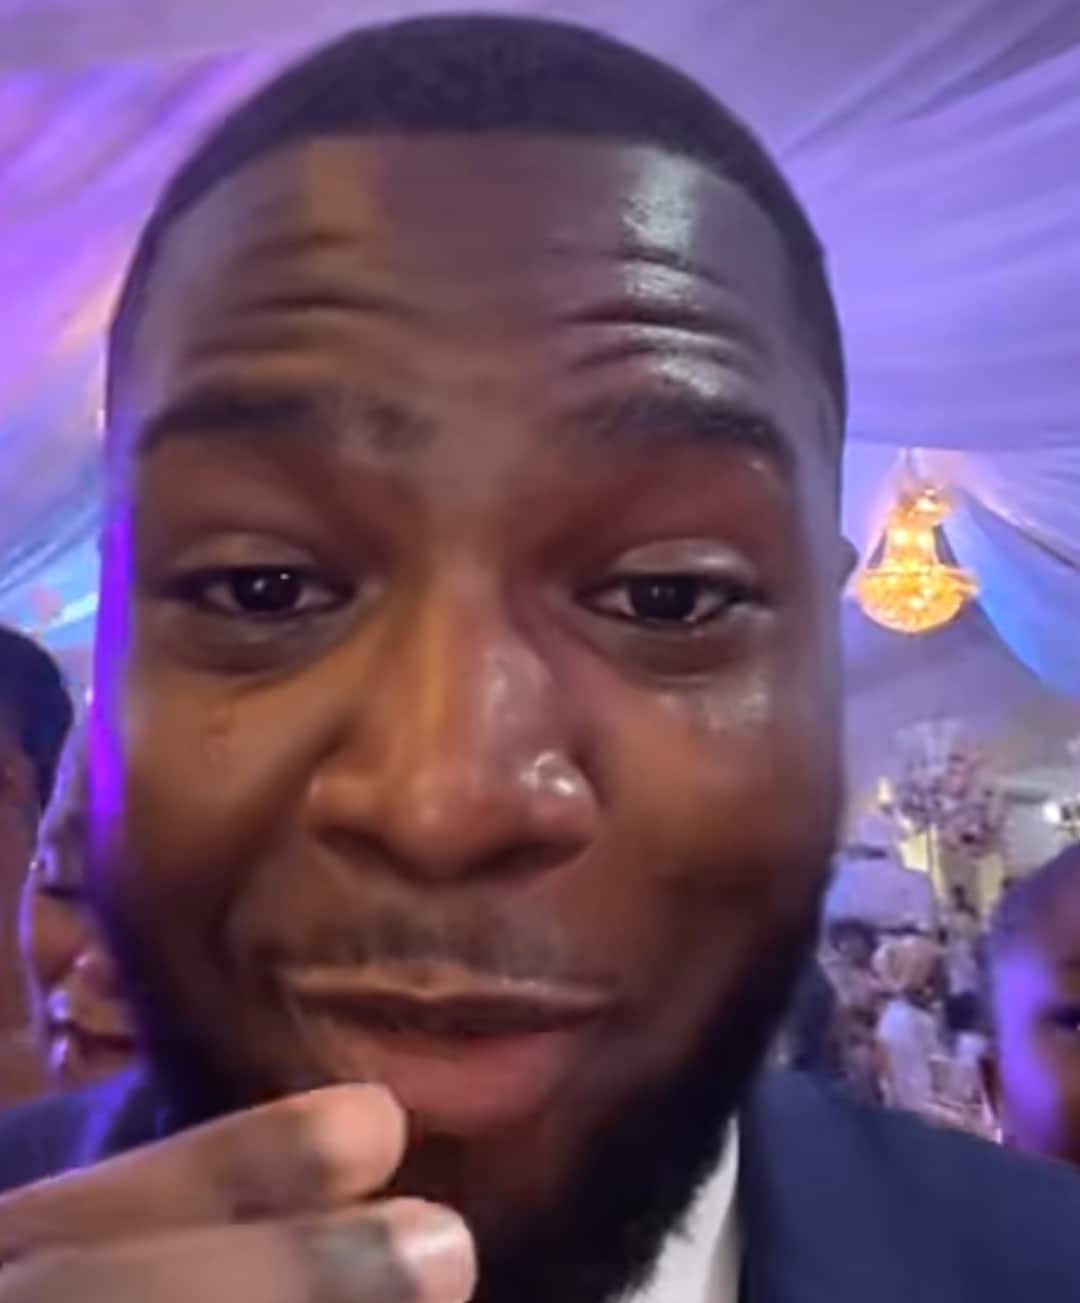 "Emotional wedding moment" - Grown Nigerian man in tears as his oldest friend ties the knot with her heartthrob